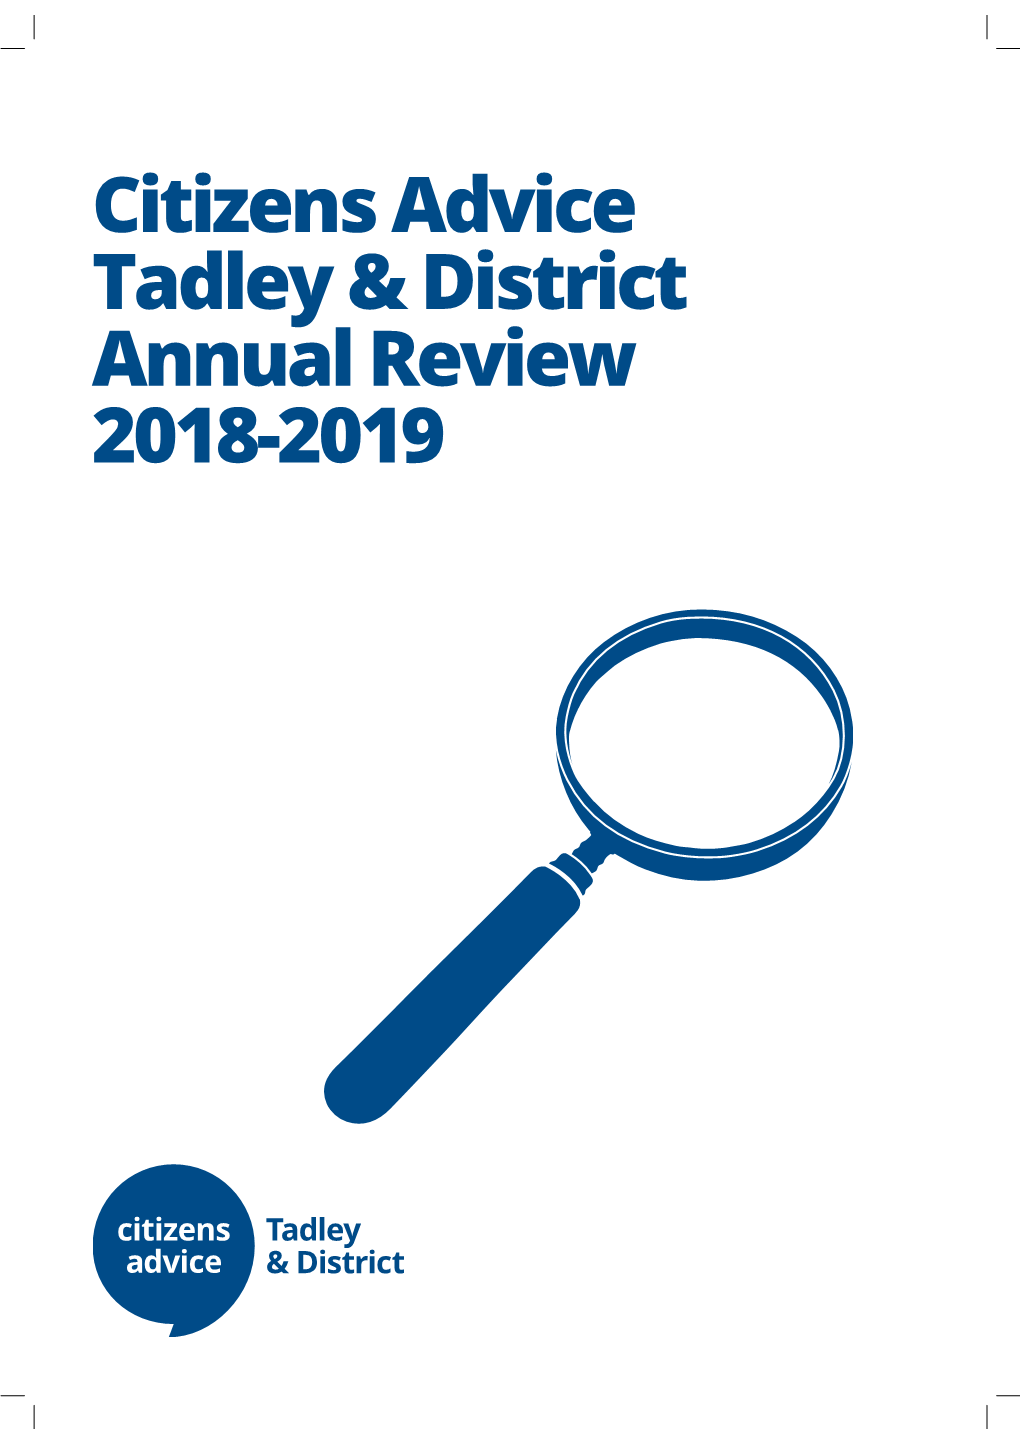 Citizens Advice Tadley & District Annual Review 2018-2019